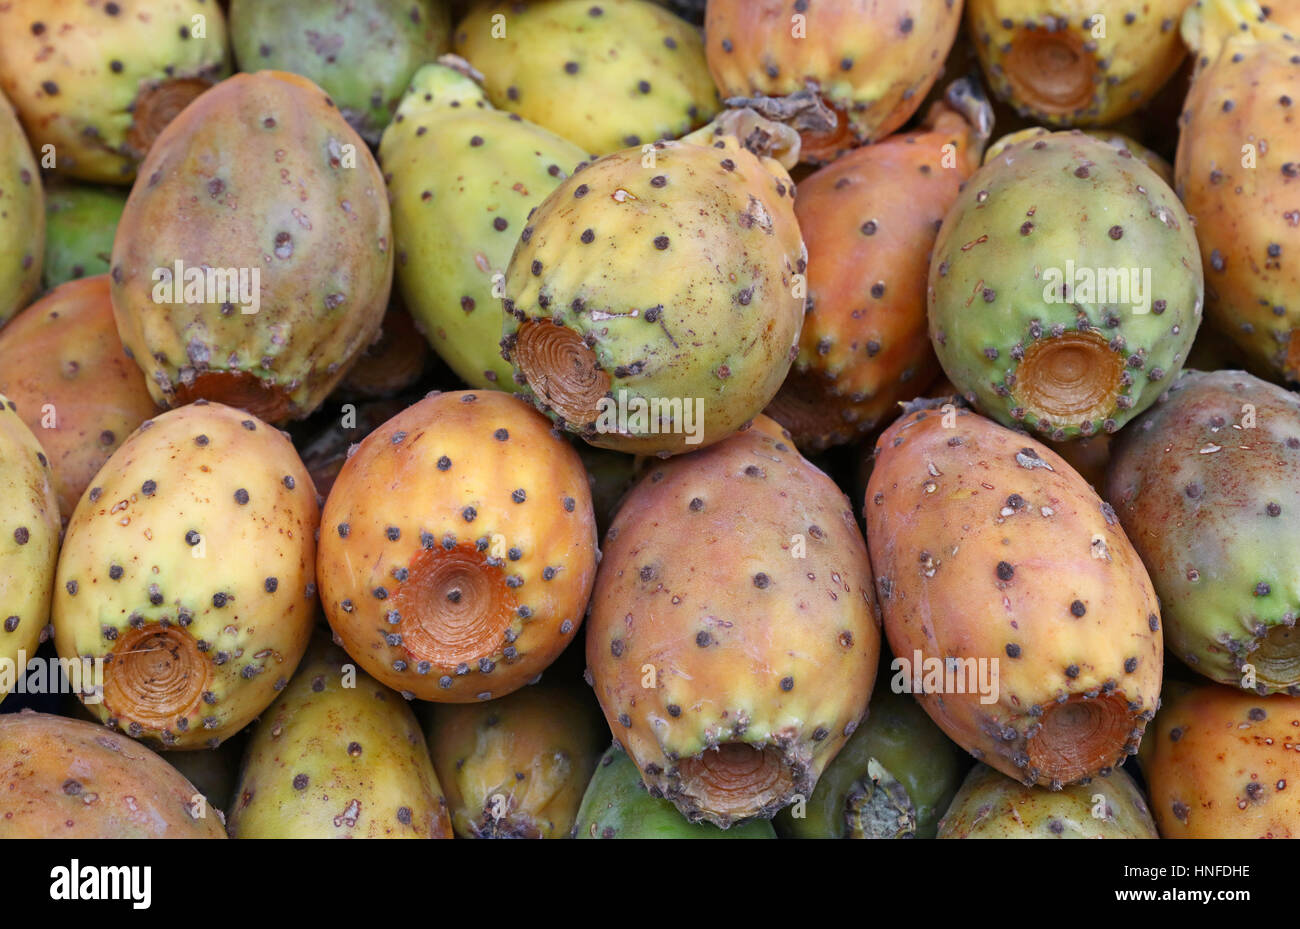 Fresh Opuntia ficus-indica (Indian fig, Prickly pear) cactus fruits sale on retail market stall display, close up Stock Photo